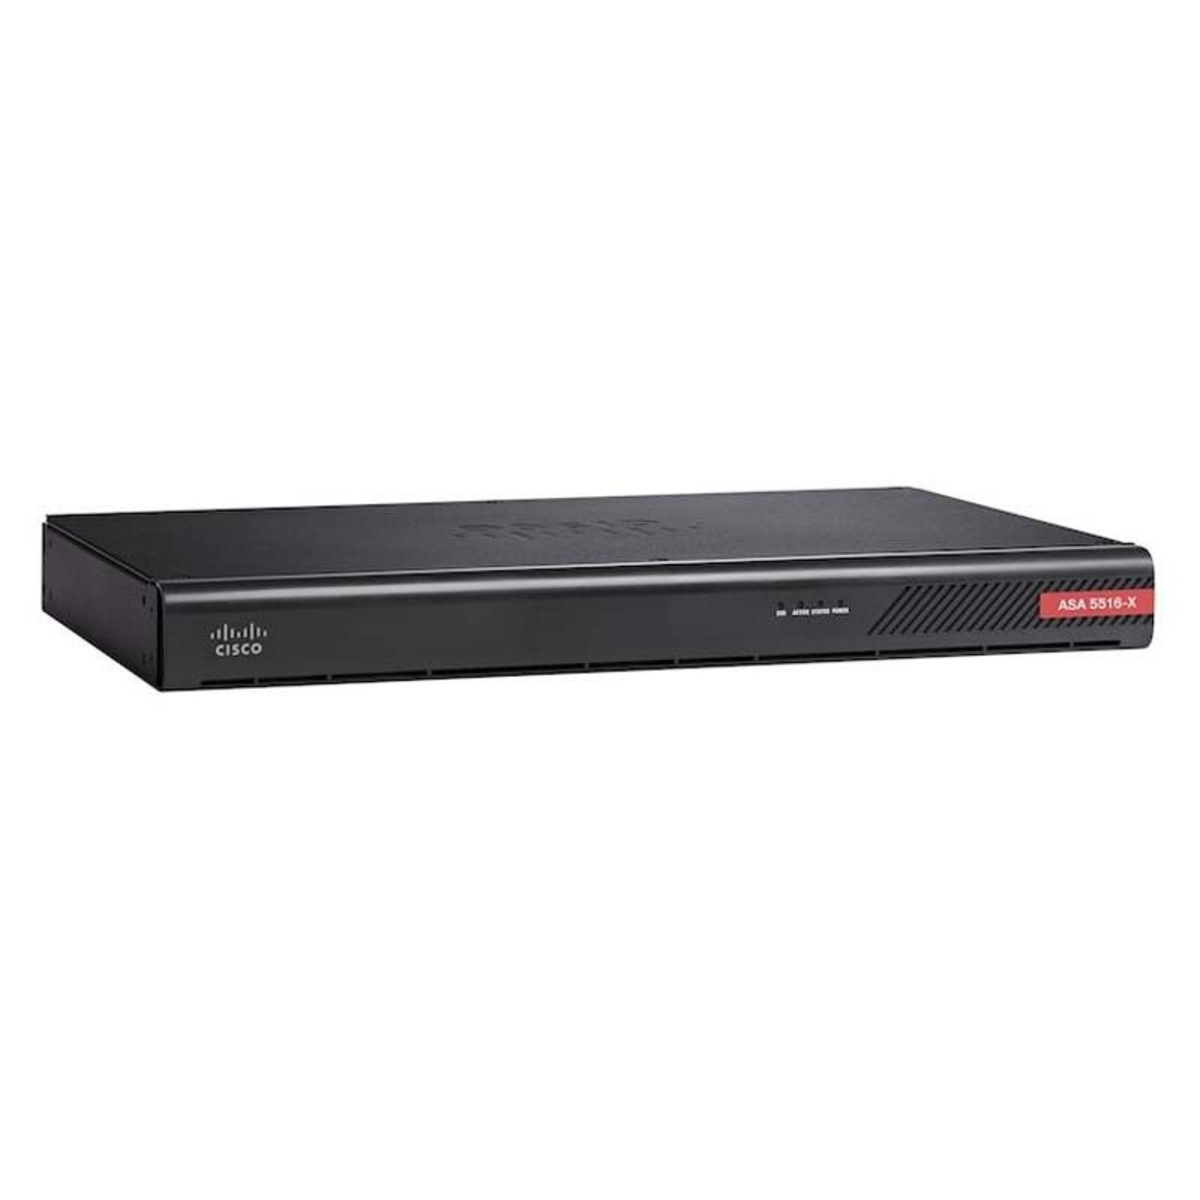 Cisco Fire POWER Services Security Appliance 8 ports (p/n- ASA 5516-X )